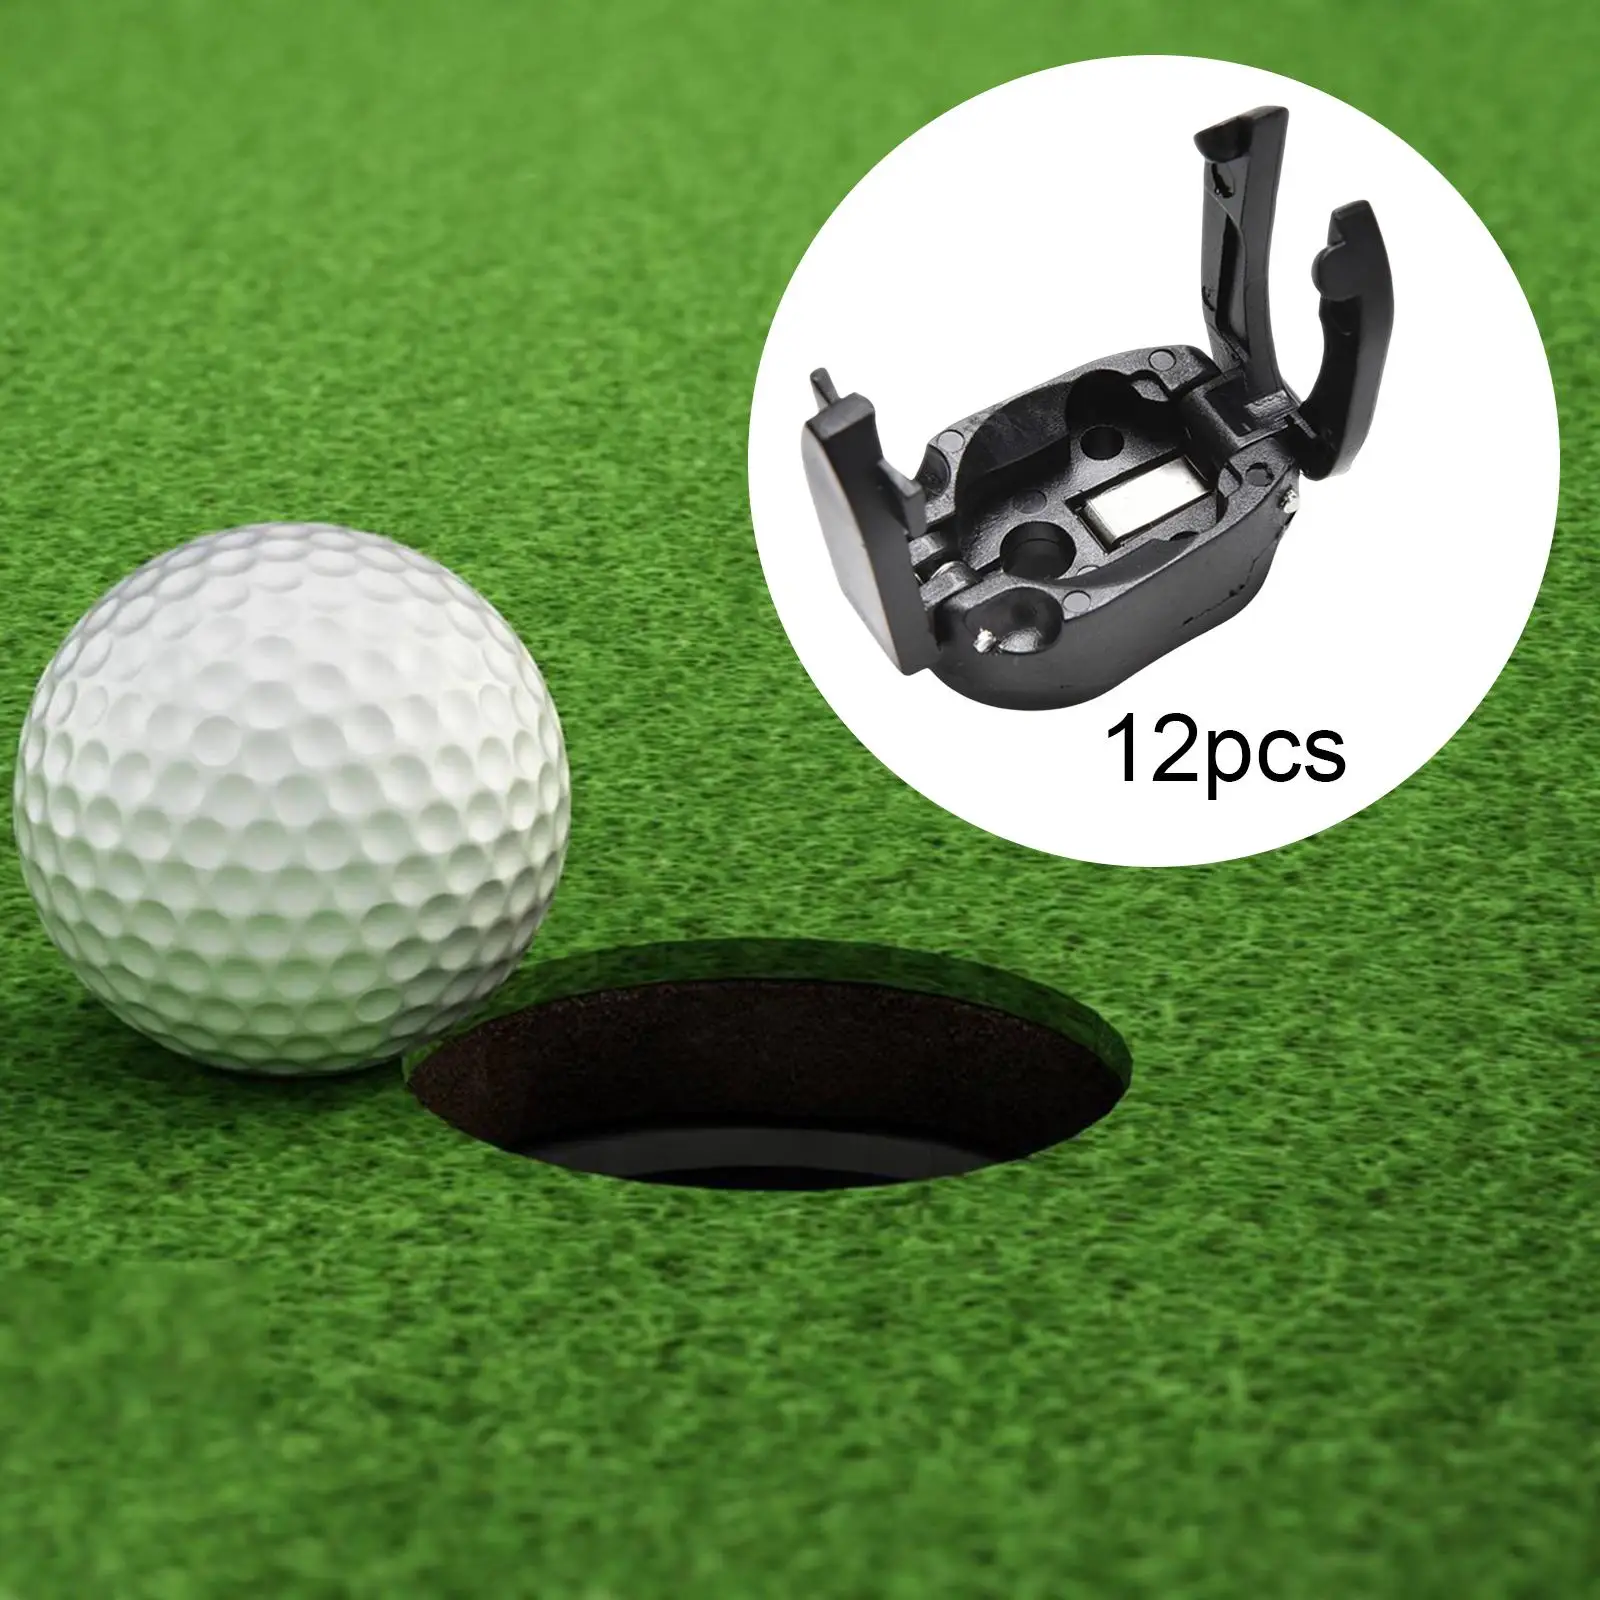 12pcs/bag Mini Golf Ball PickUp For Putter Open Pitch and Retriever Tool Golf Accessories Golf Ball Pick up Training Aids Grip